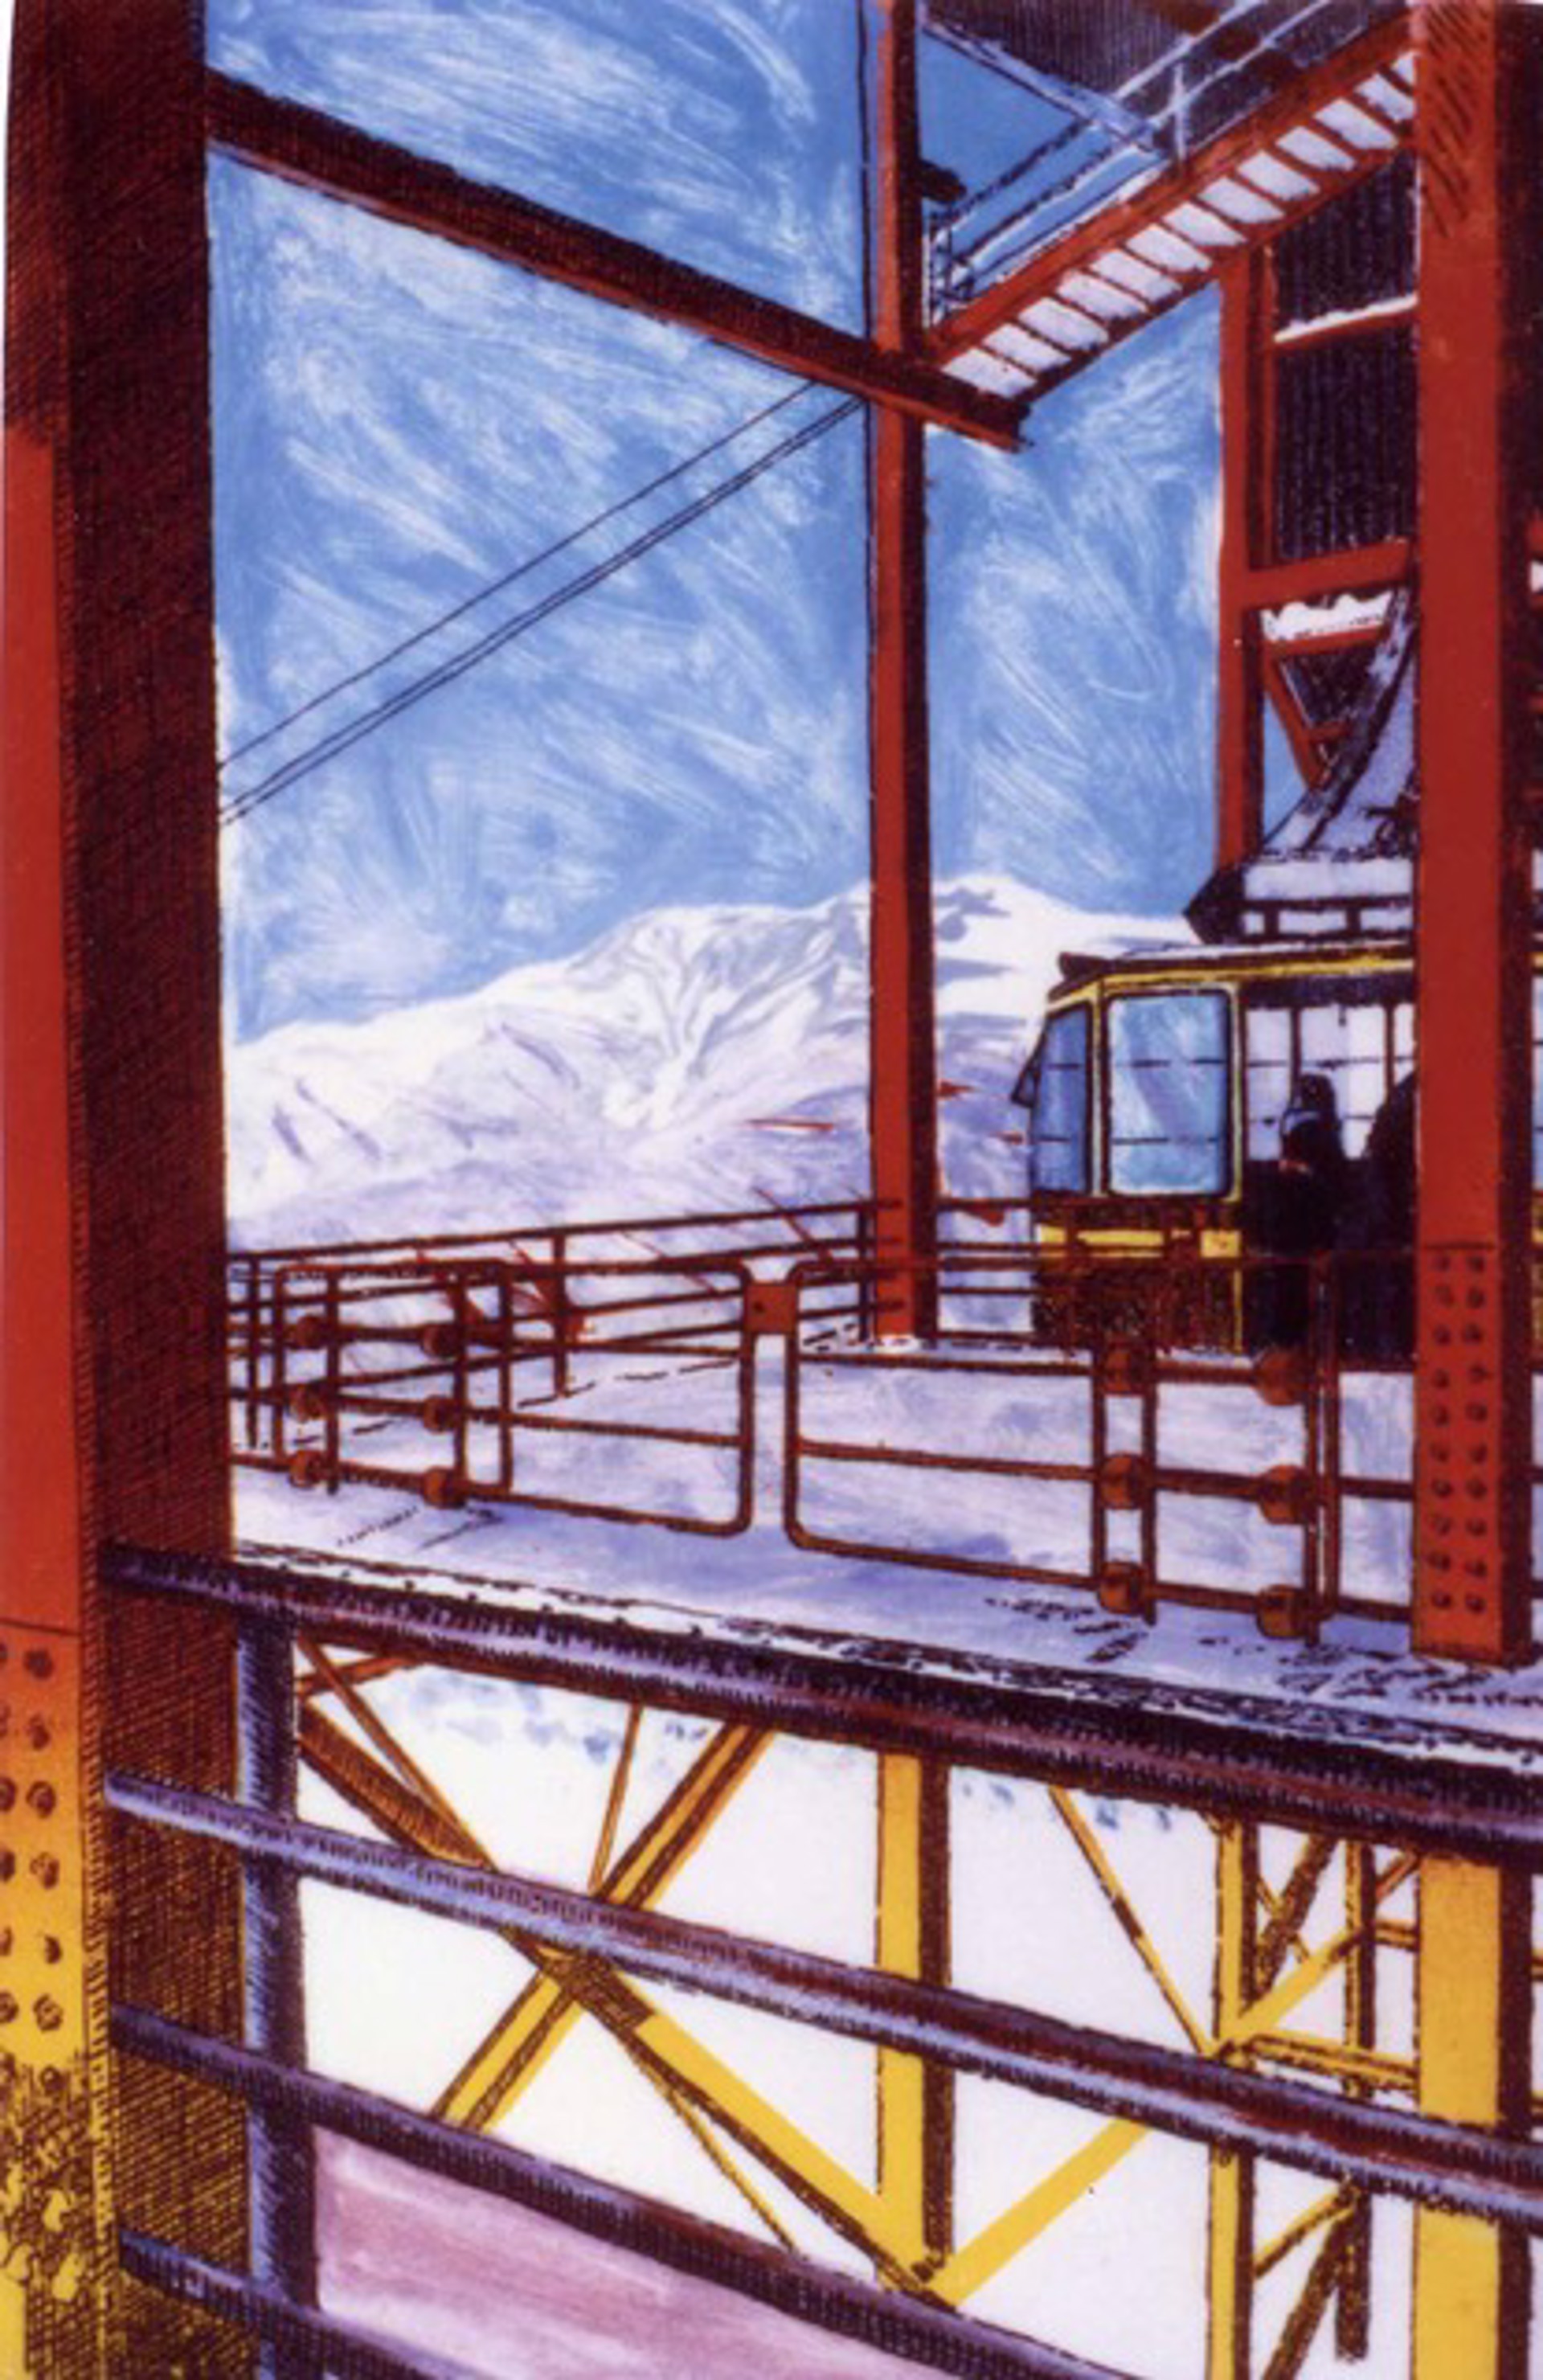 Tram Station Summit by Pam Traver